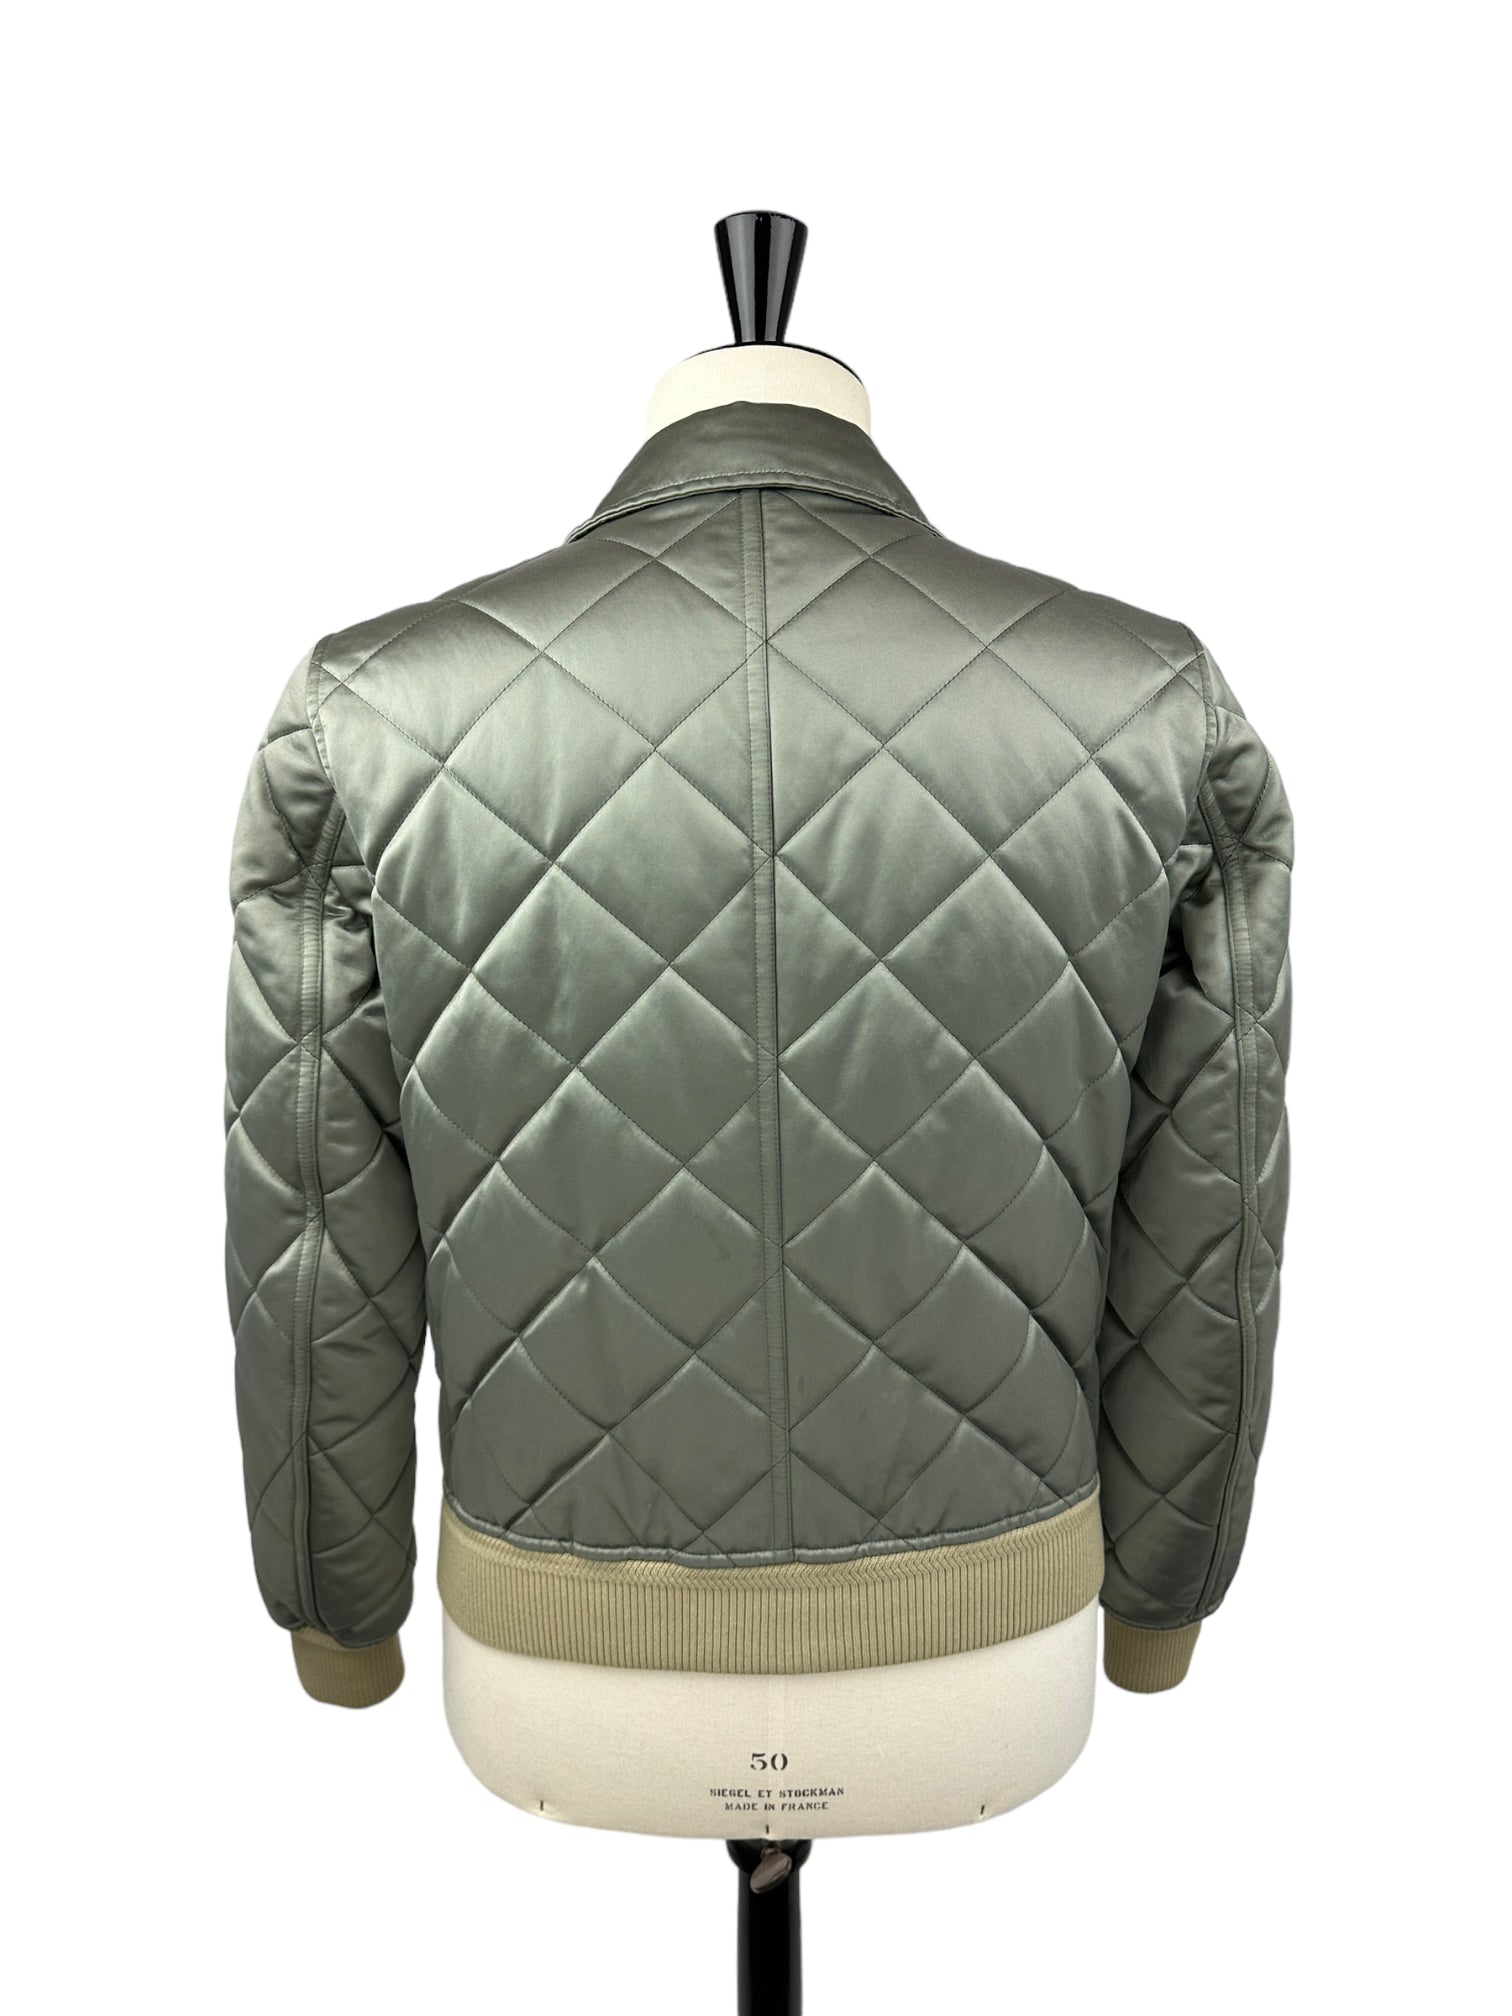 Tom Ford Pistache Diamond-Quilted Bomber Jacket